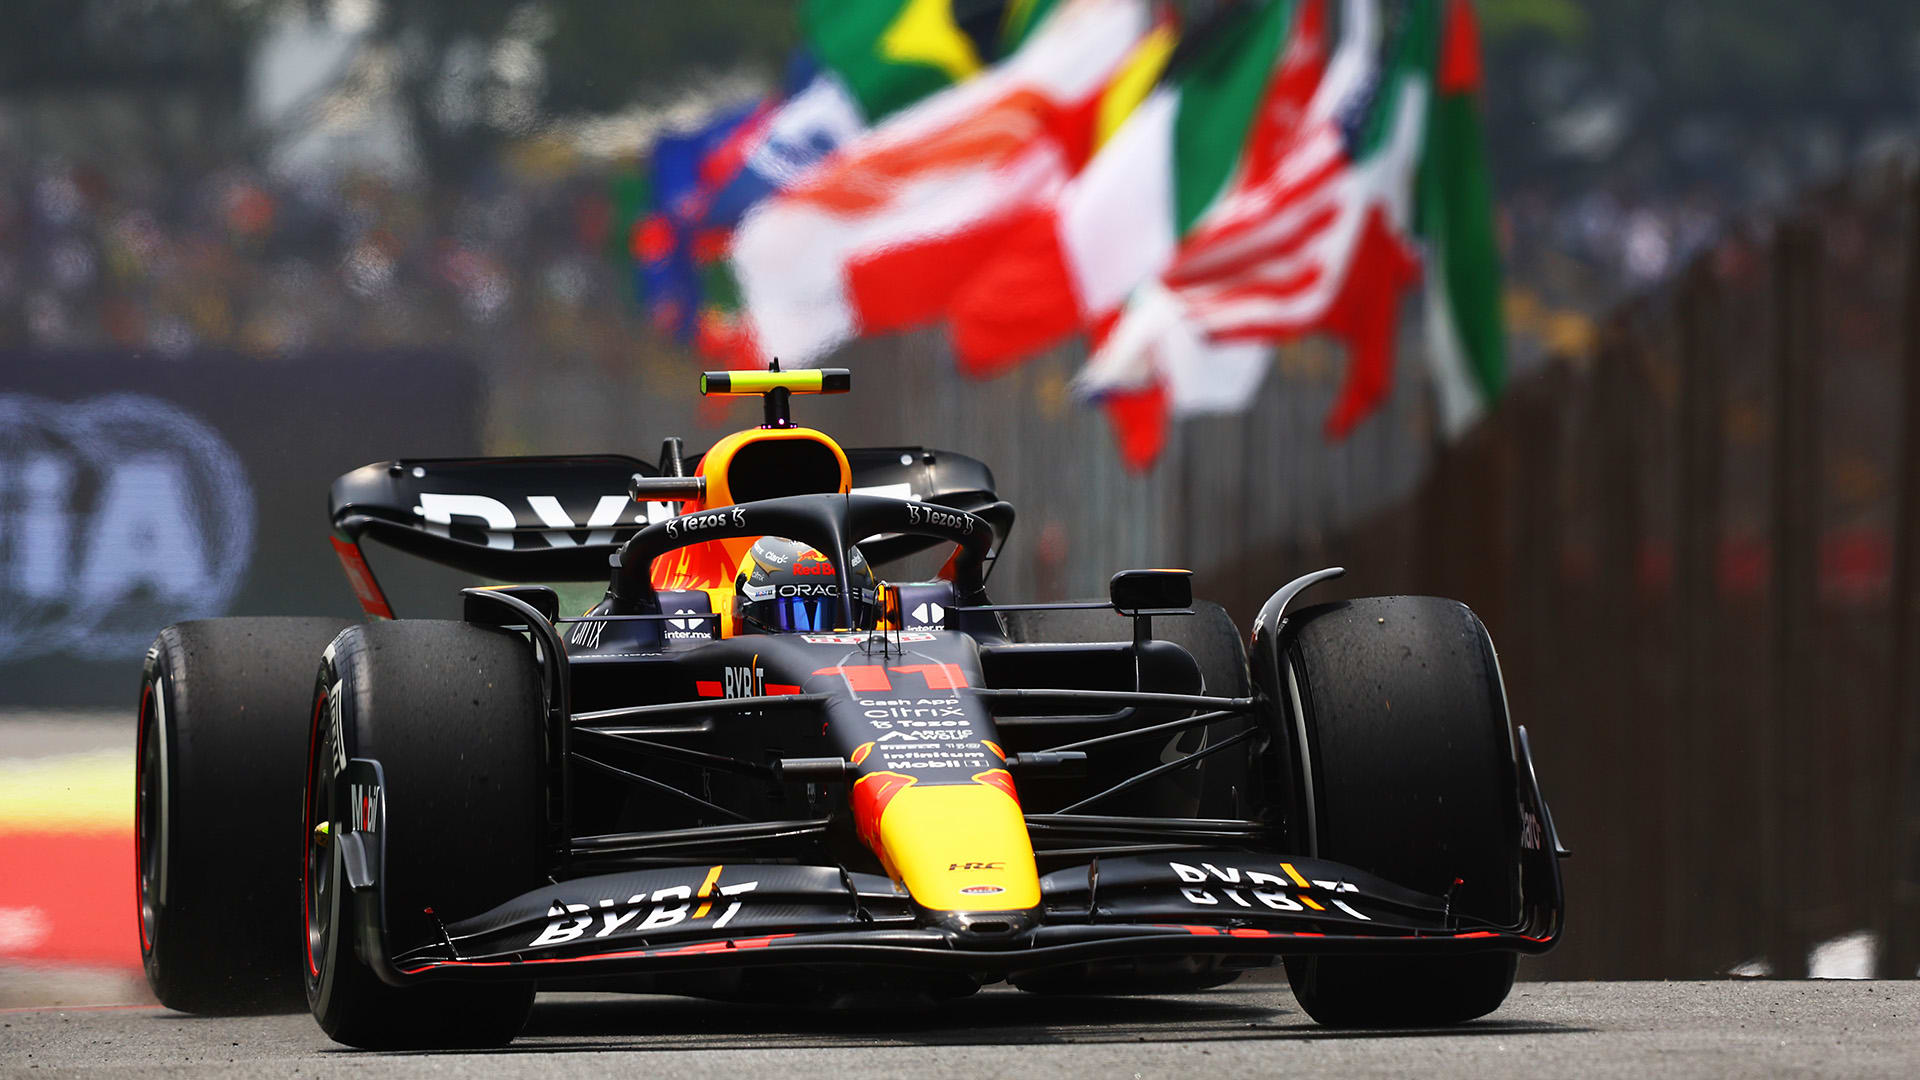 FP1: Perez edges out Leclerc and Verstappen in ultra-close first practice at Interlagos as qualifying nears - Formula 1